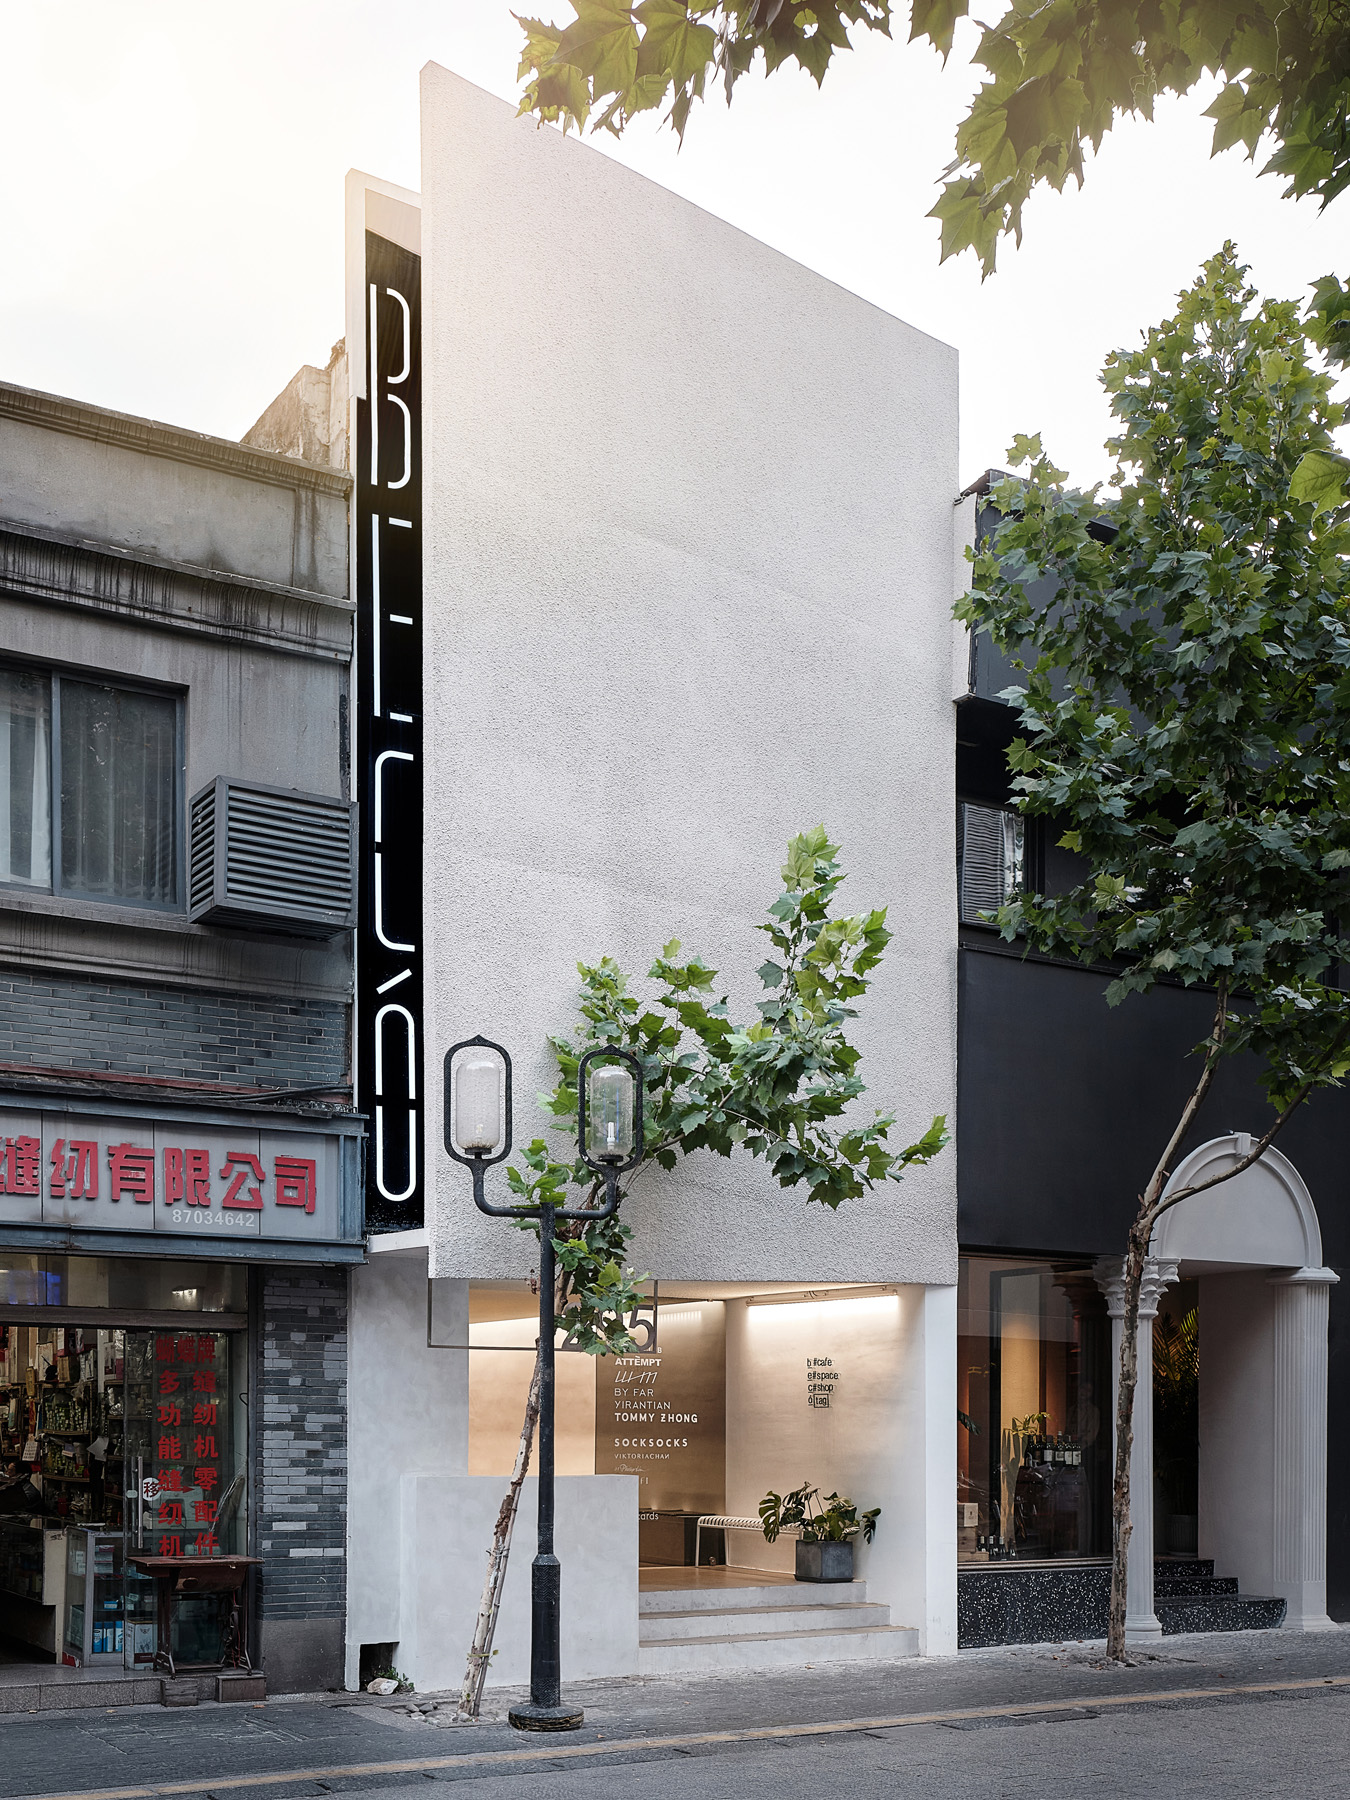 SCENERY ALLEY | Hangzhou Becó295 select store and creative space, by TEAM_BLDG, China 1